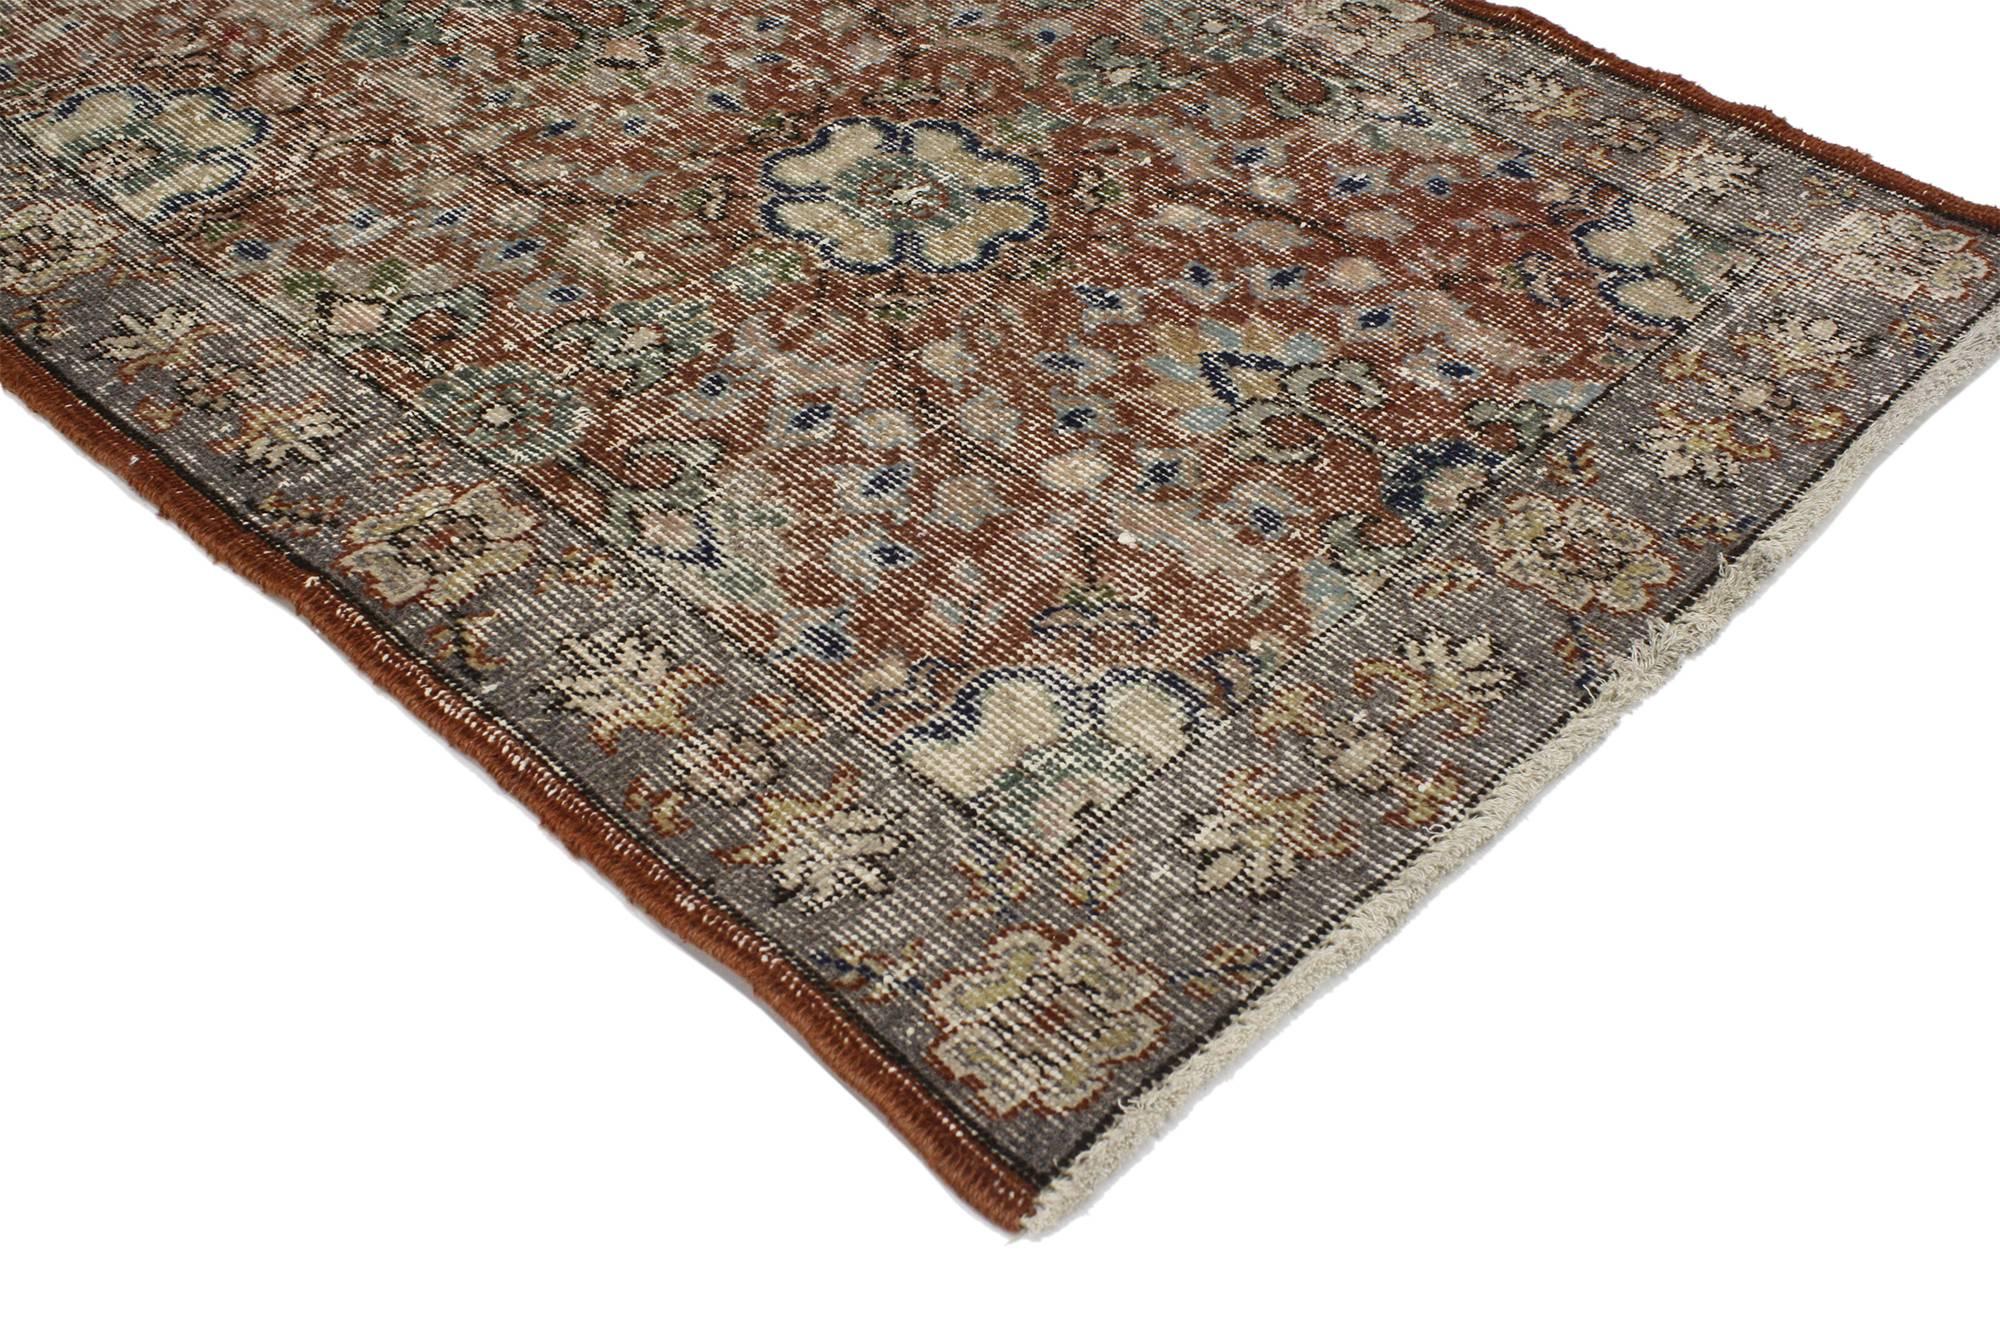 51967 Distressed Vintage Turkish Sivas Rug with Rustic Modern English Style 02'07 x 06'02. Balancing a timeless floral design with traditional sensibility and a lovingly timeworn patina, this hand knotted wool distressed vintage Turkish Sivas rug